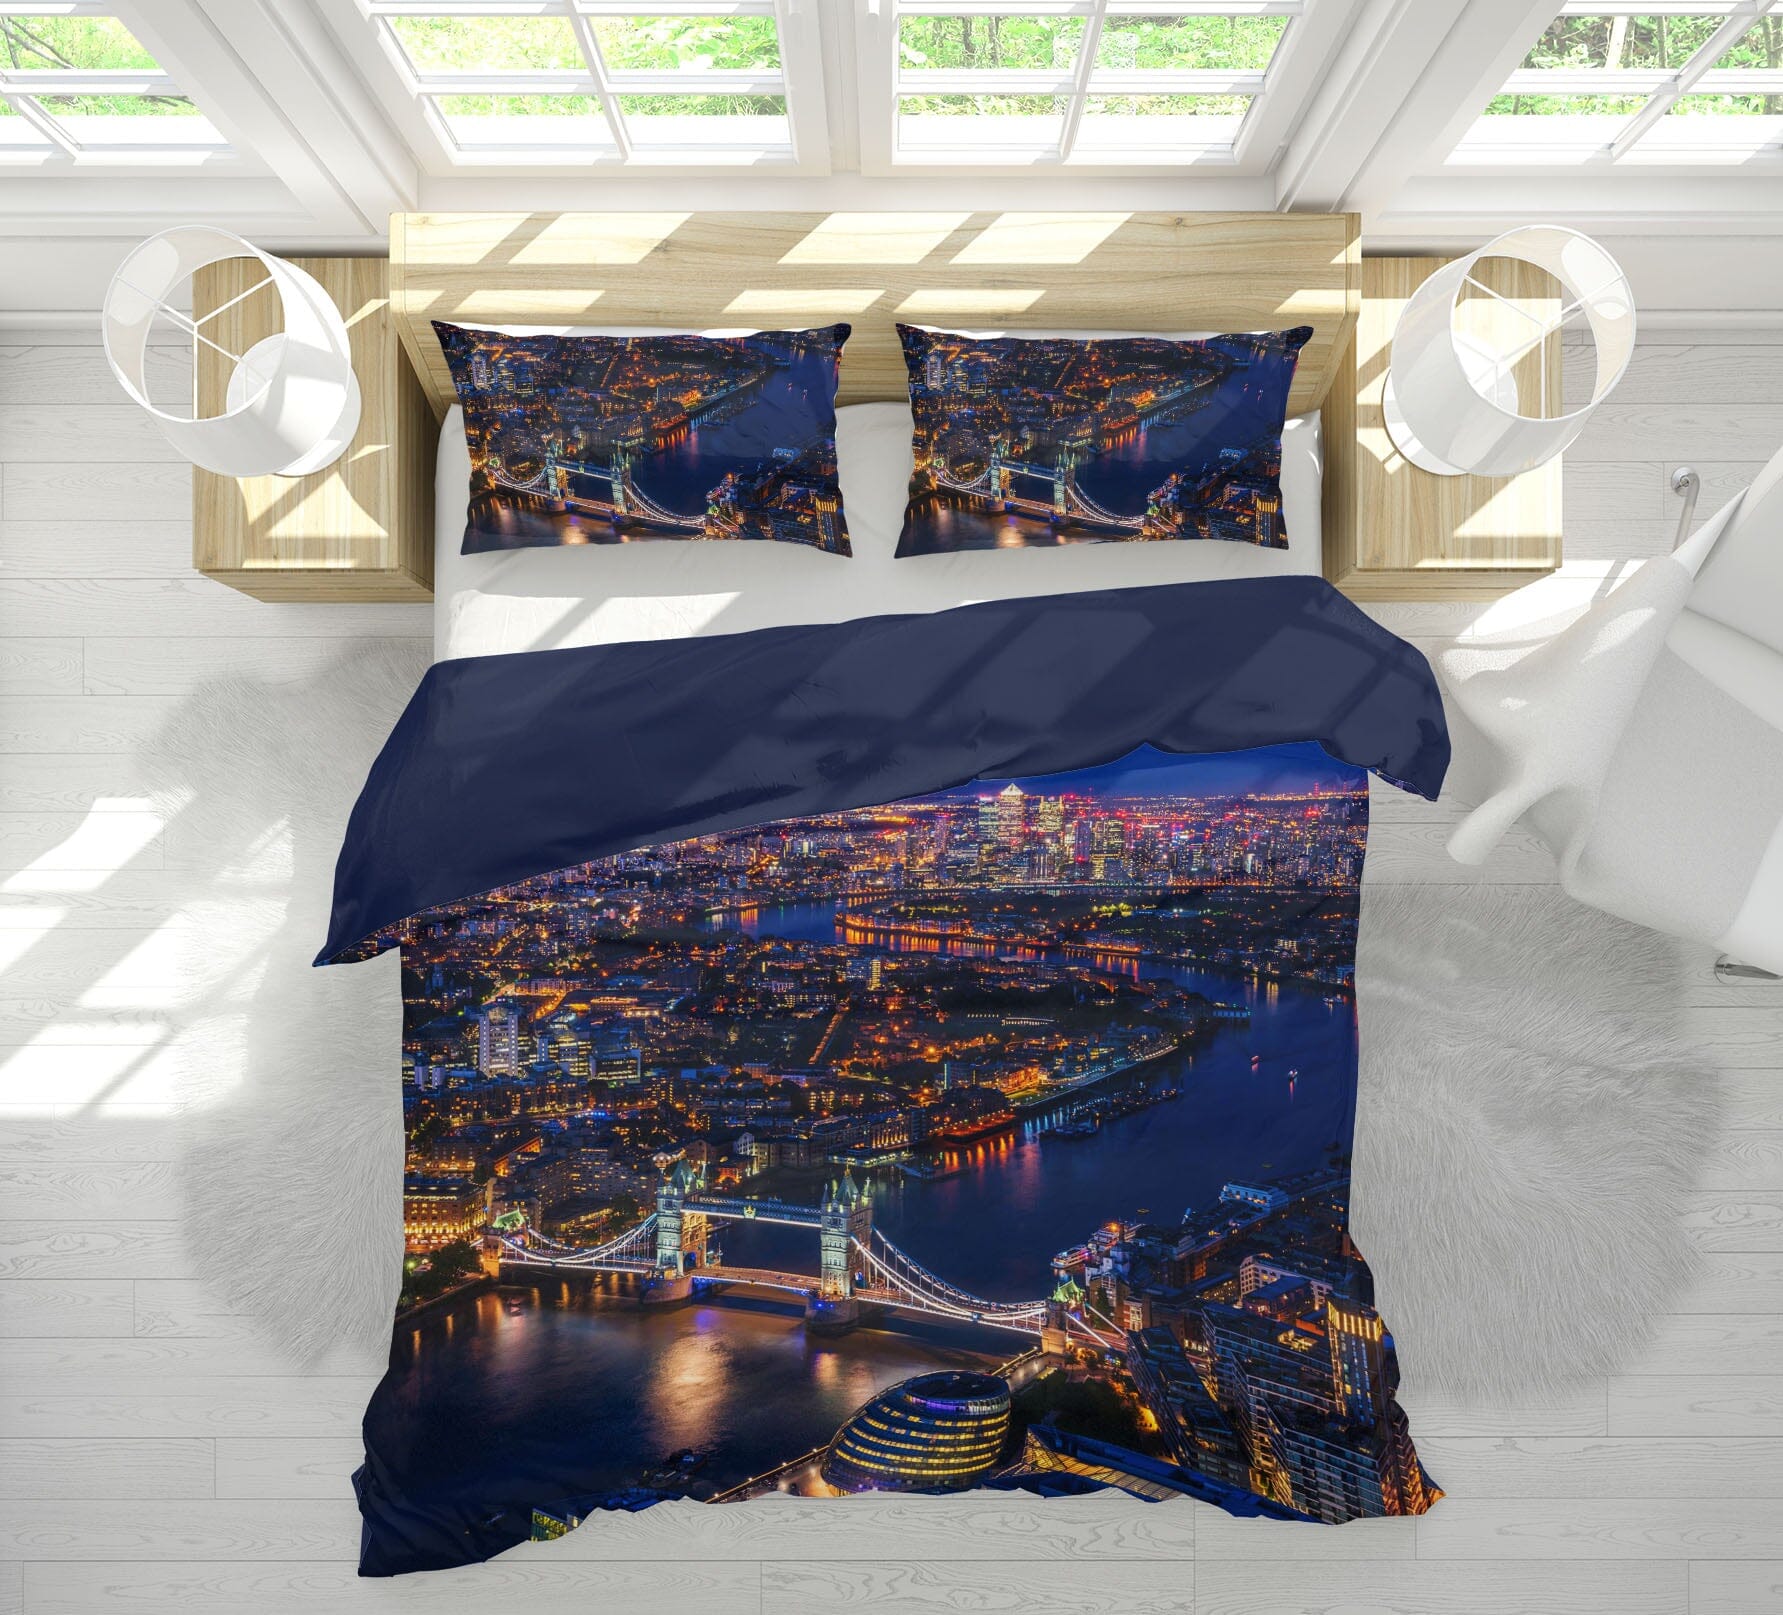 3D Night Lights 2103 Marco Carmassi Bedding Bed Pillowcases Quilt Quiet Covers AJ Creativity Home 